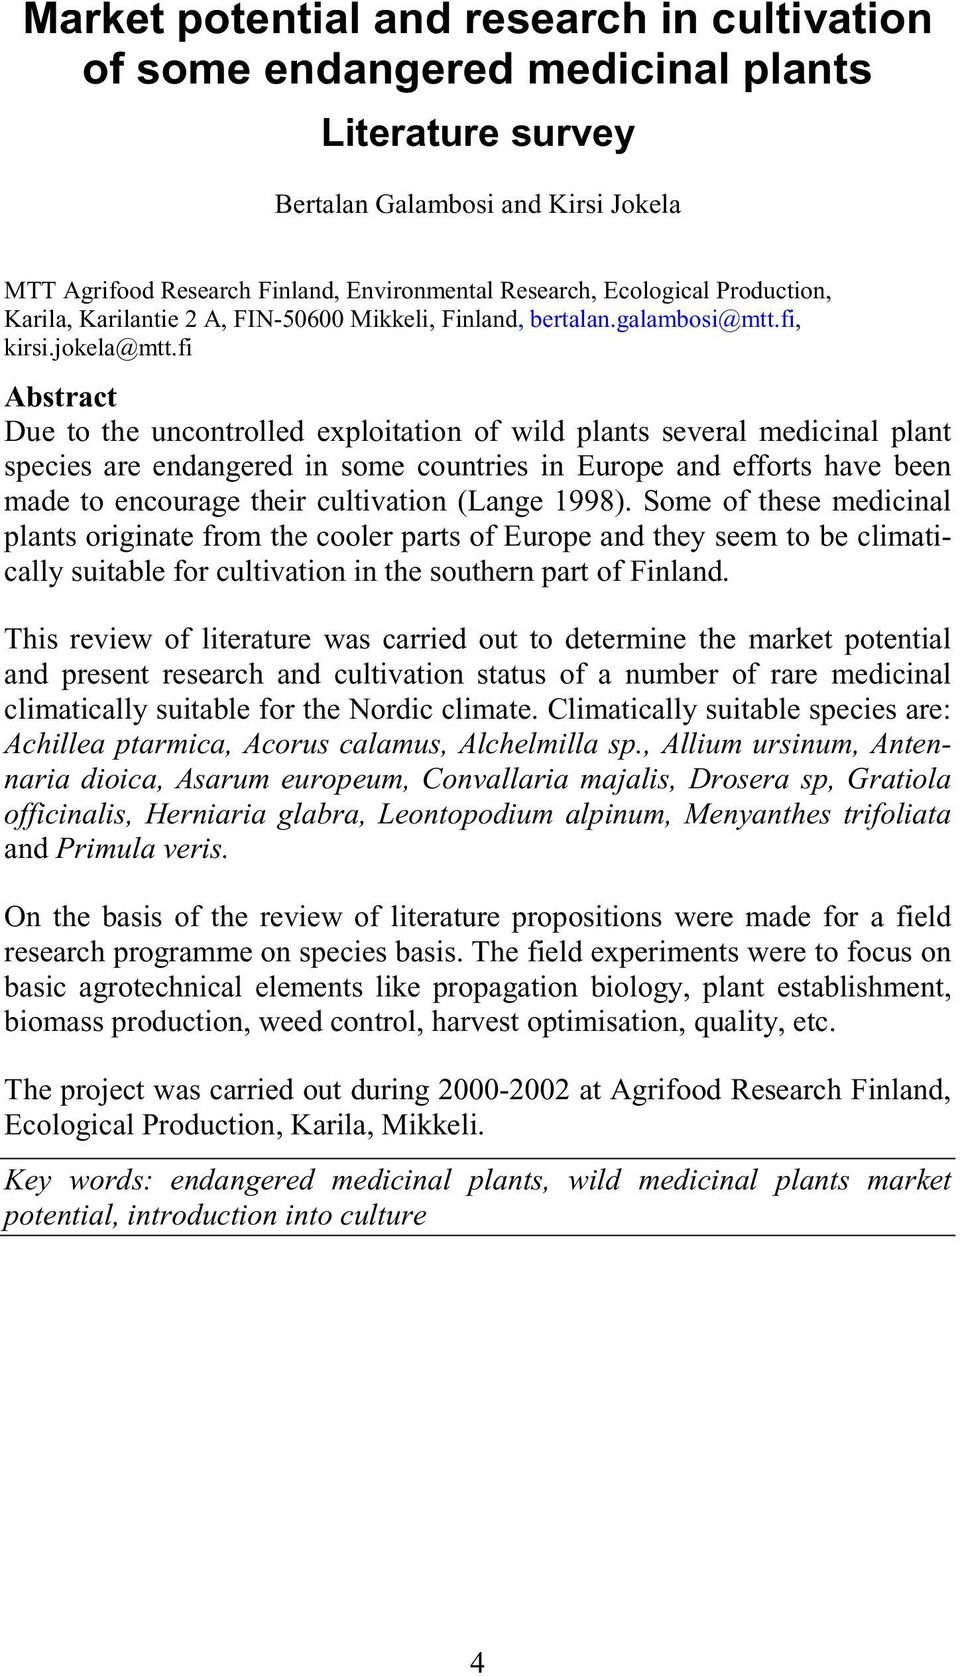 fi Abstract Due to the uncontrolled exploitation of wild plants several medicinal plant species are endangered in some countries in Europe and efforts have been made to encourage their cultivation